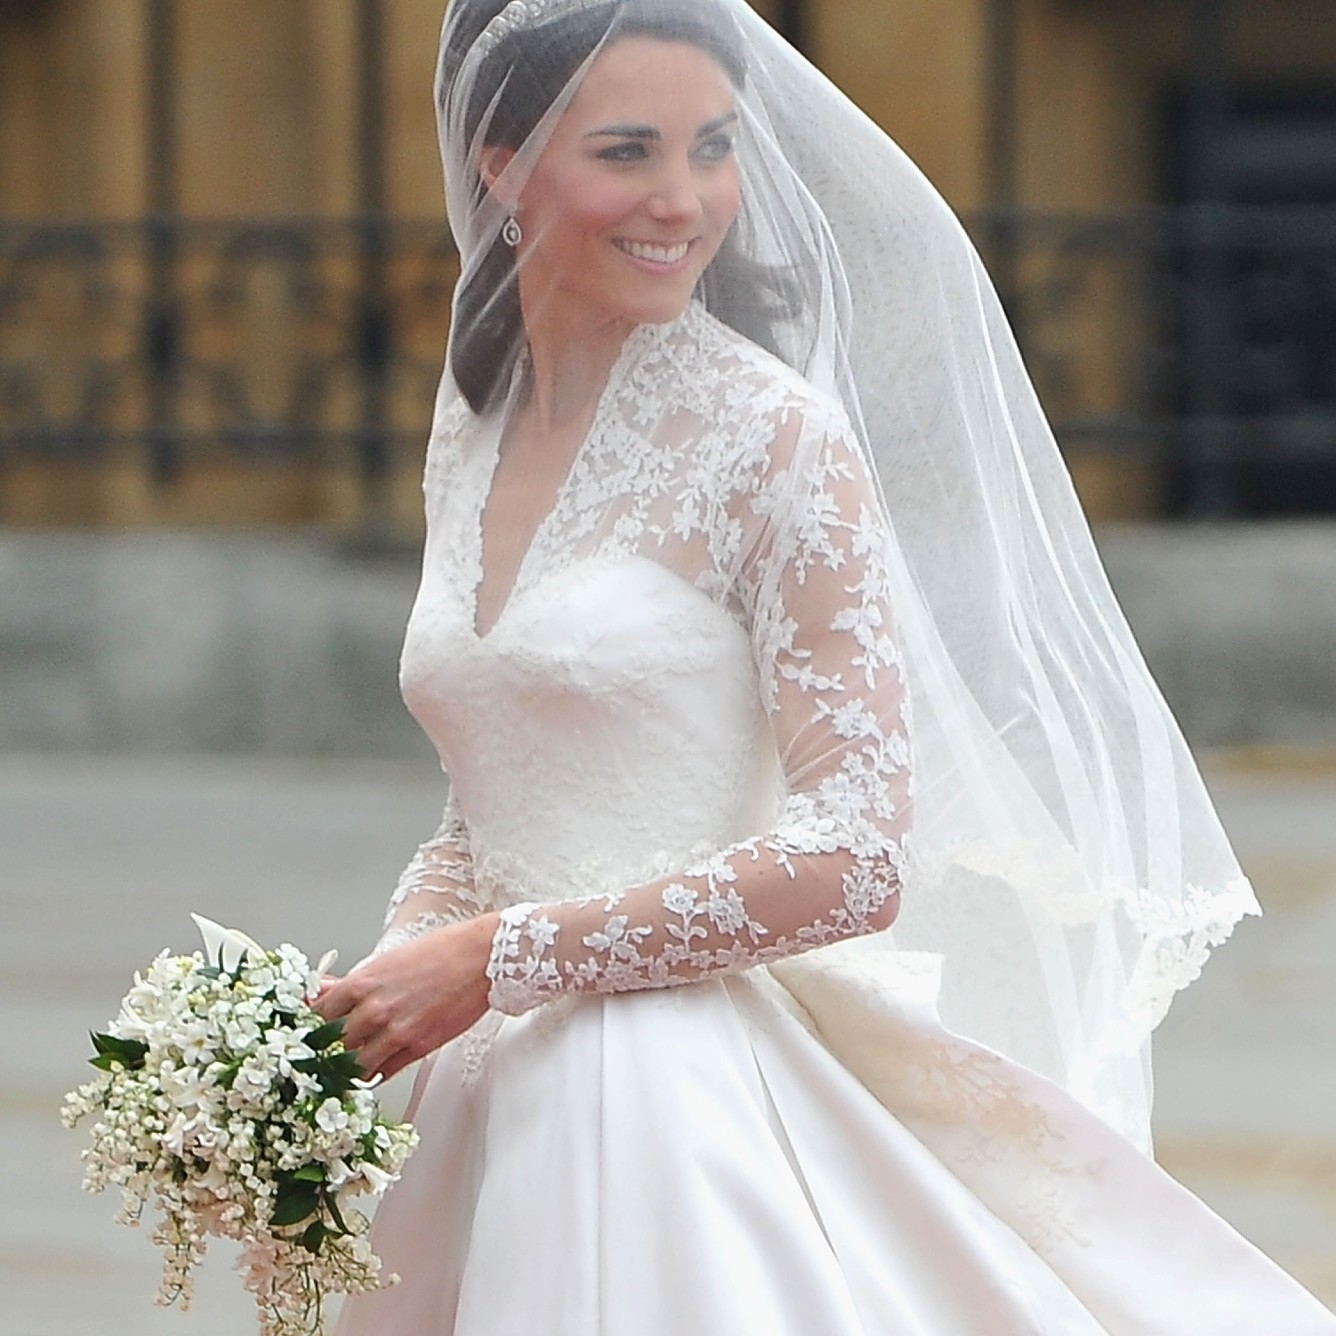 Kate Middleton Cried After Dress Designer Reveal: Expert | Marie Claire